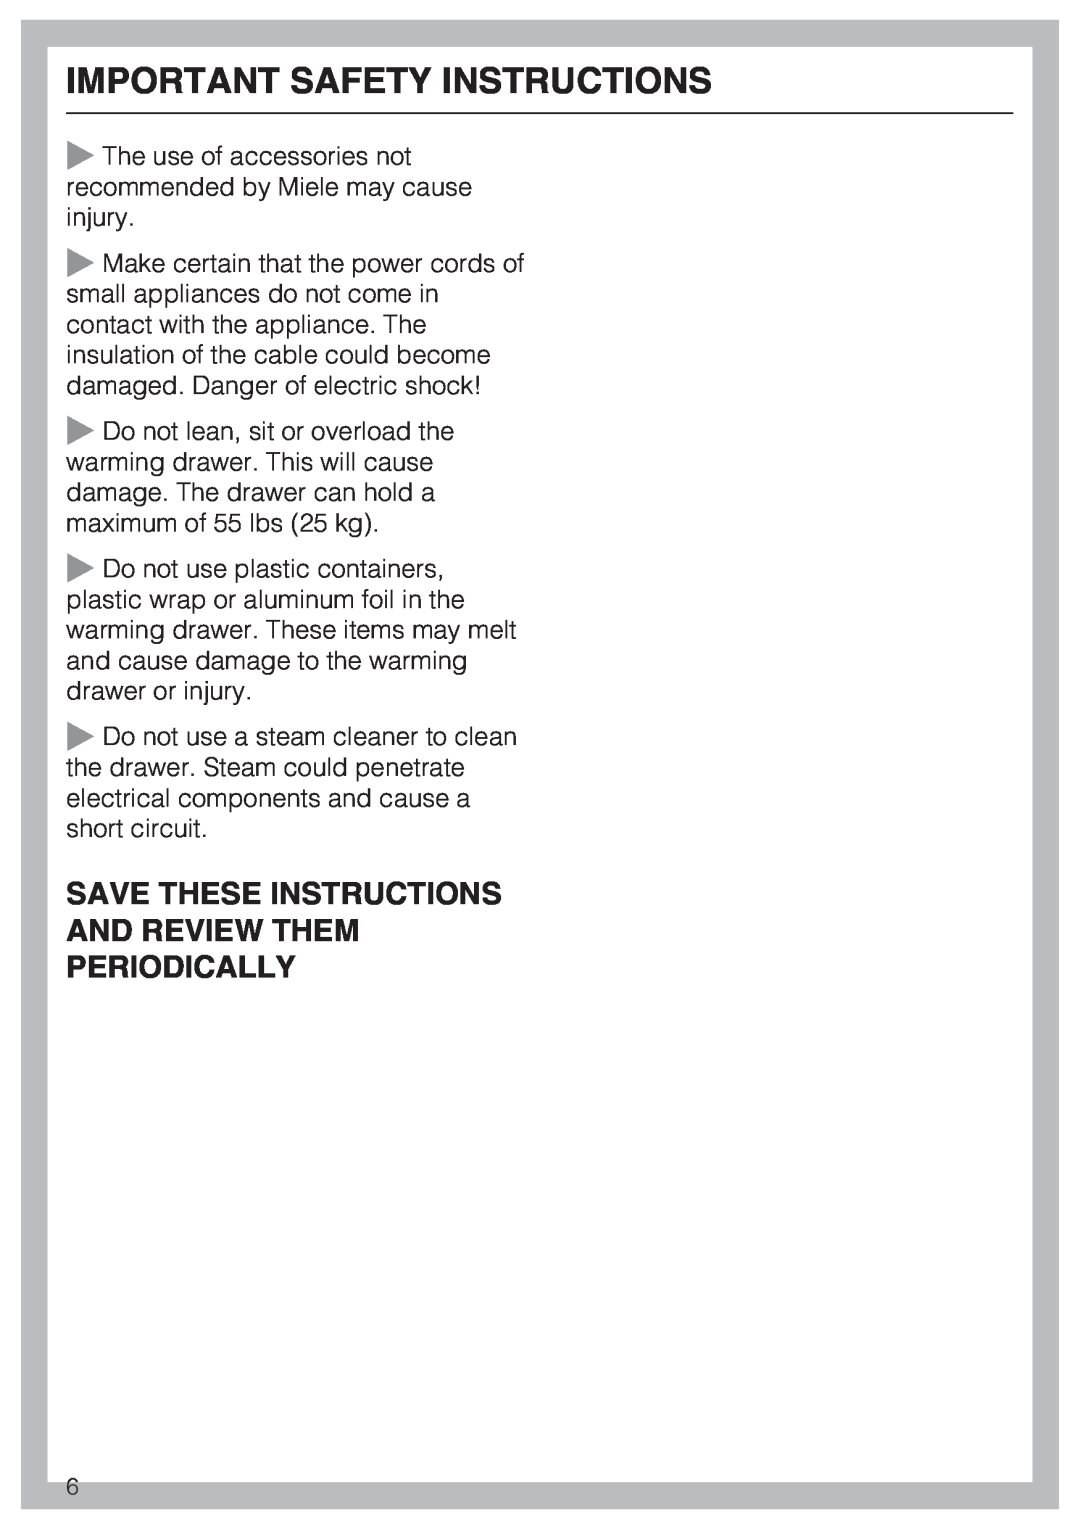 Miele ESW 47X2, ESW 48X2, ESW4082-14 Save These Instructions And Review Them, Periodically, Important Safety Instructions 